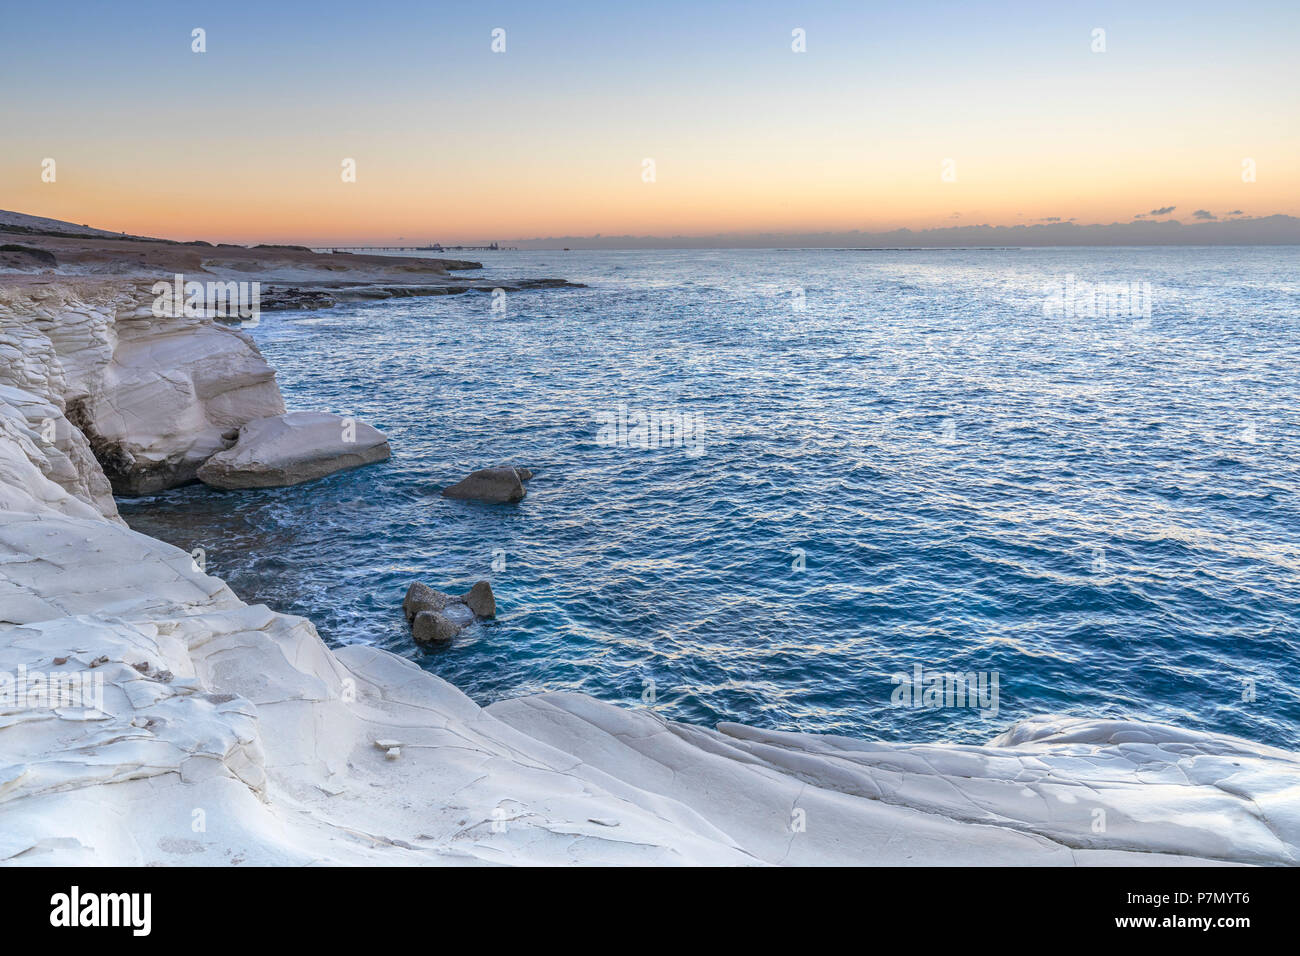 Cyprus, Limassol, The crystal water and the white rocks of Governor's Beach at dawn Stock Photo